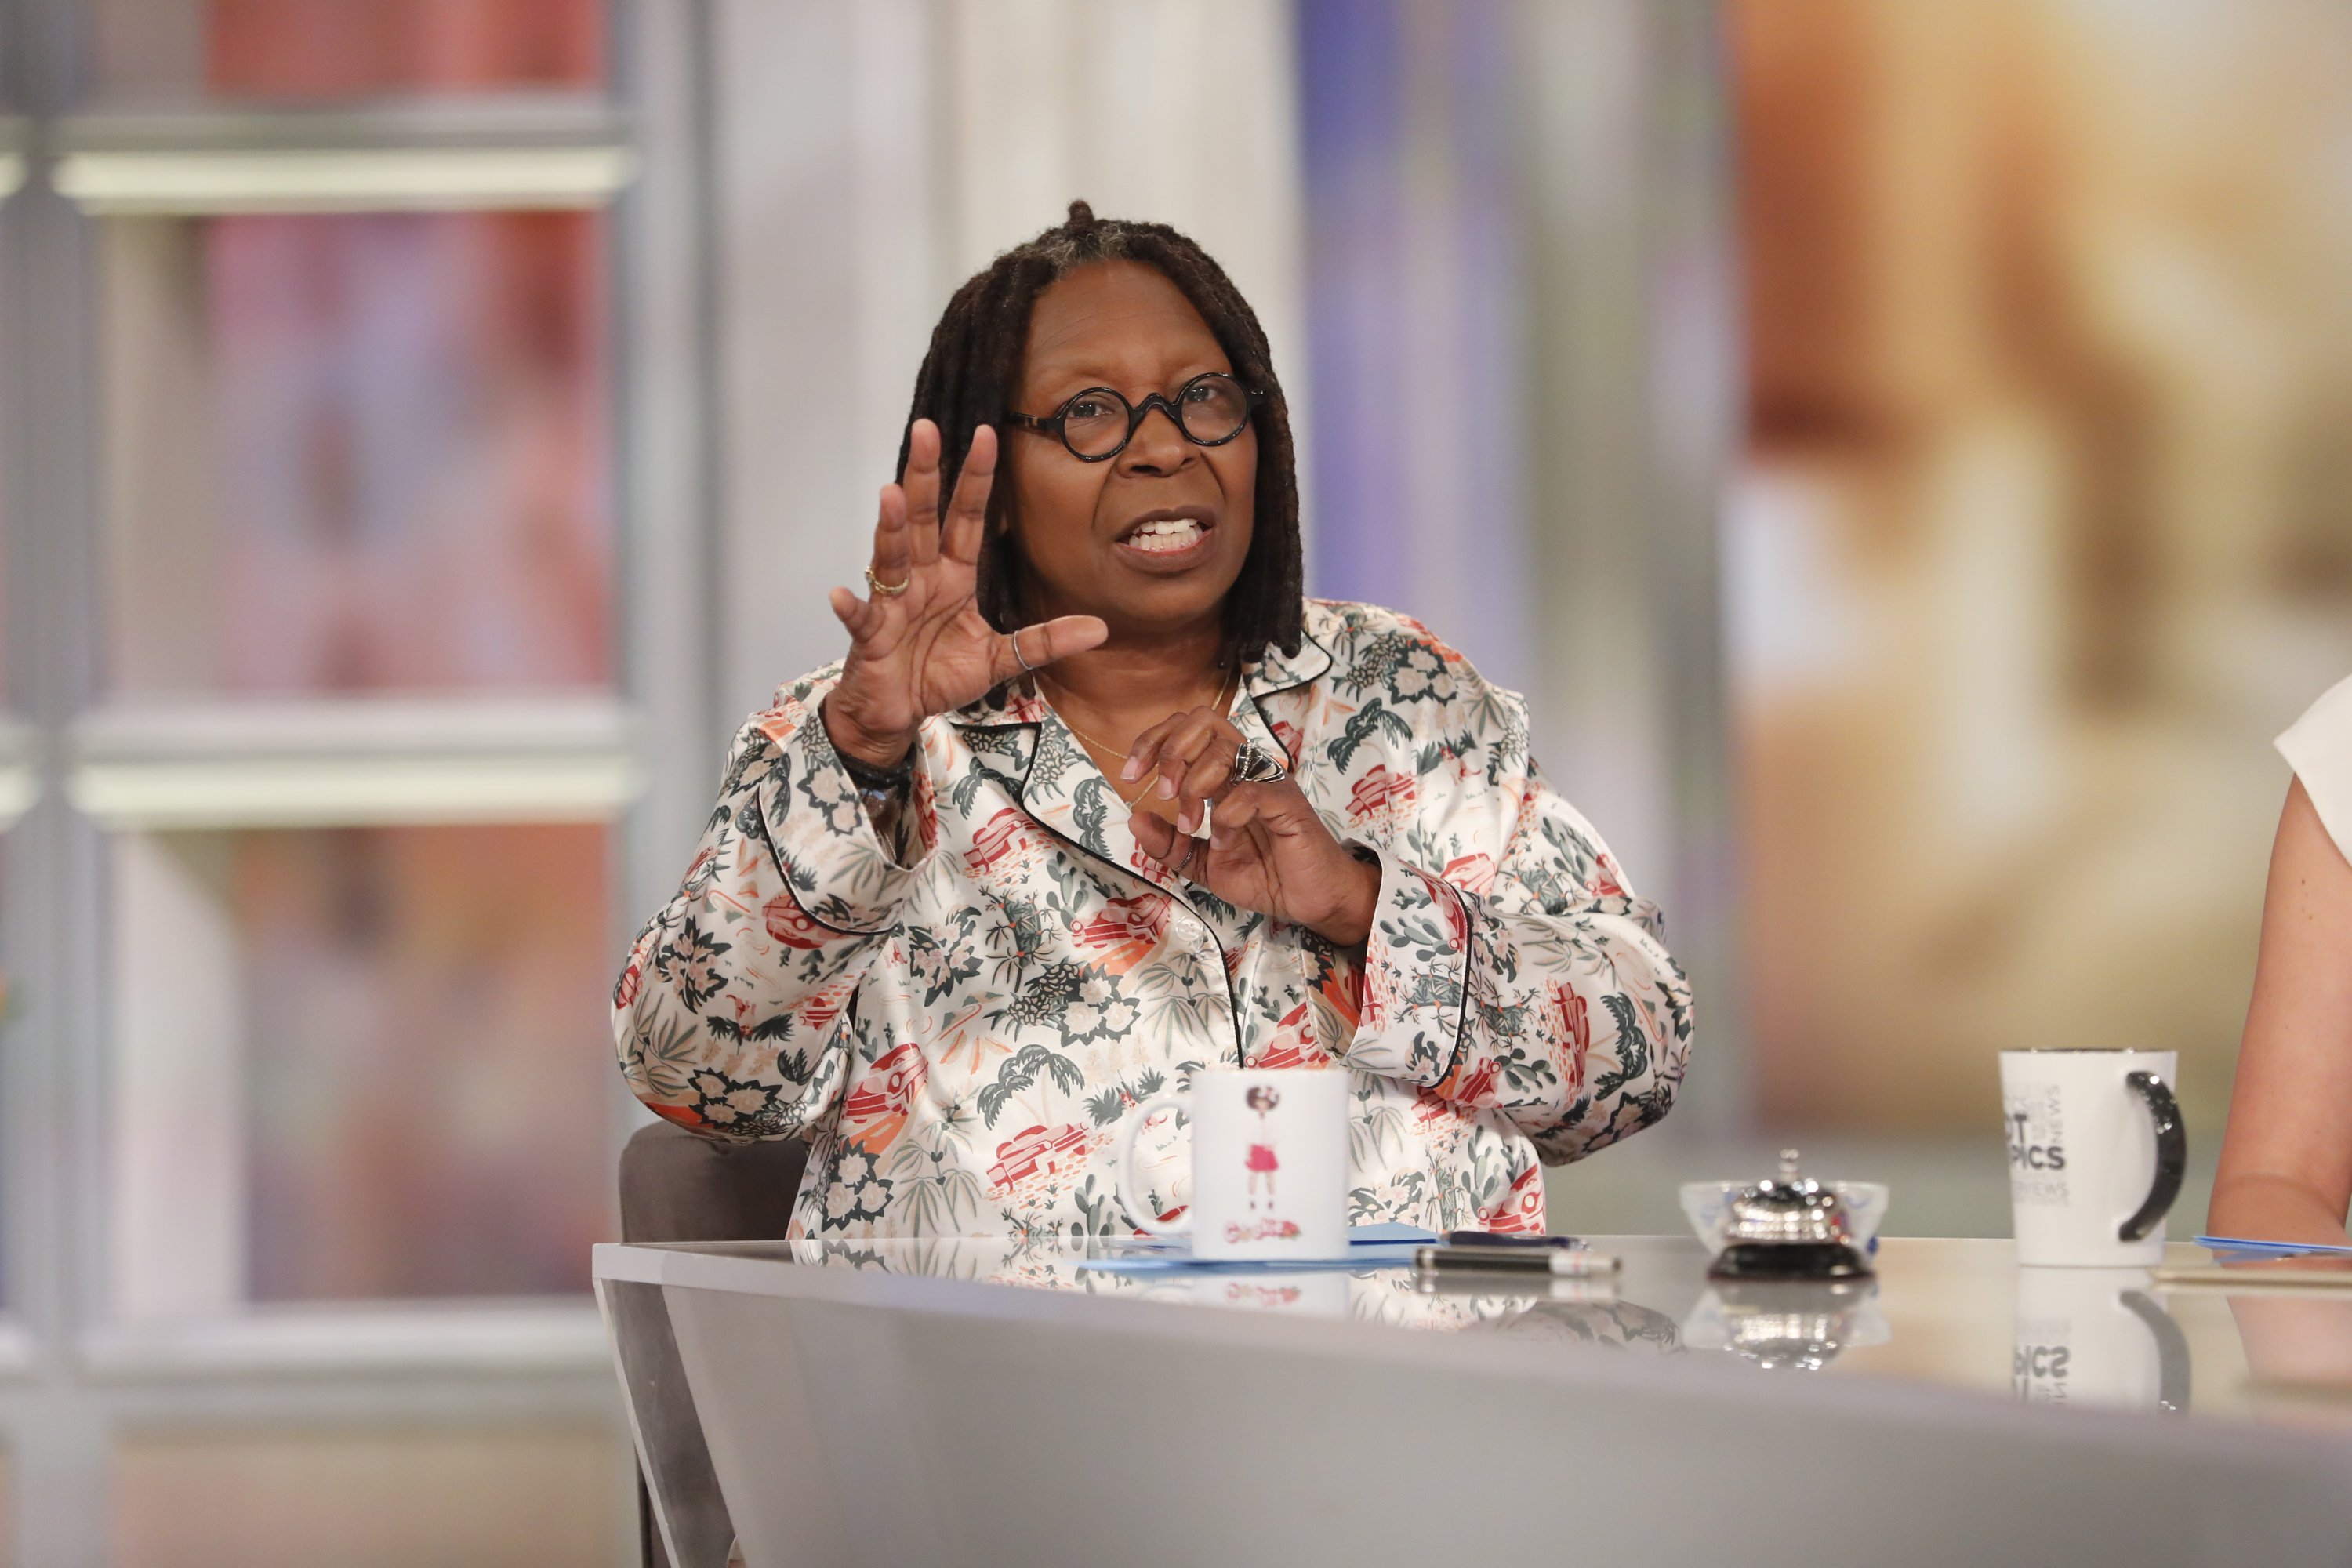 Whoopi Goldberg on Season 21 of "The View." October 16, 2018 | Source: Getty Images 